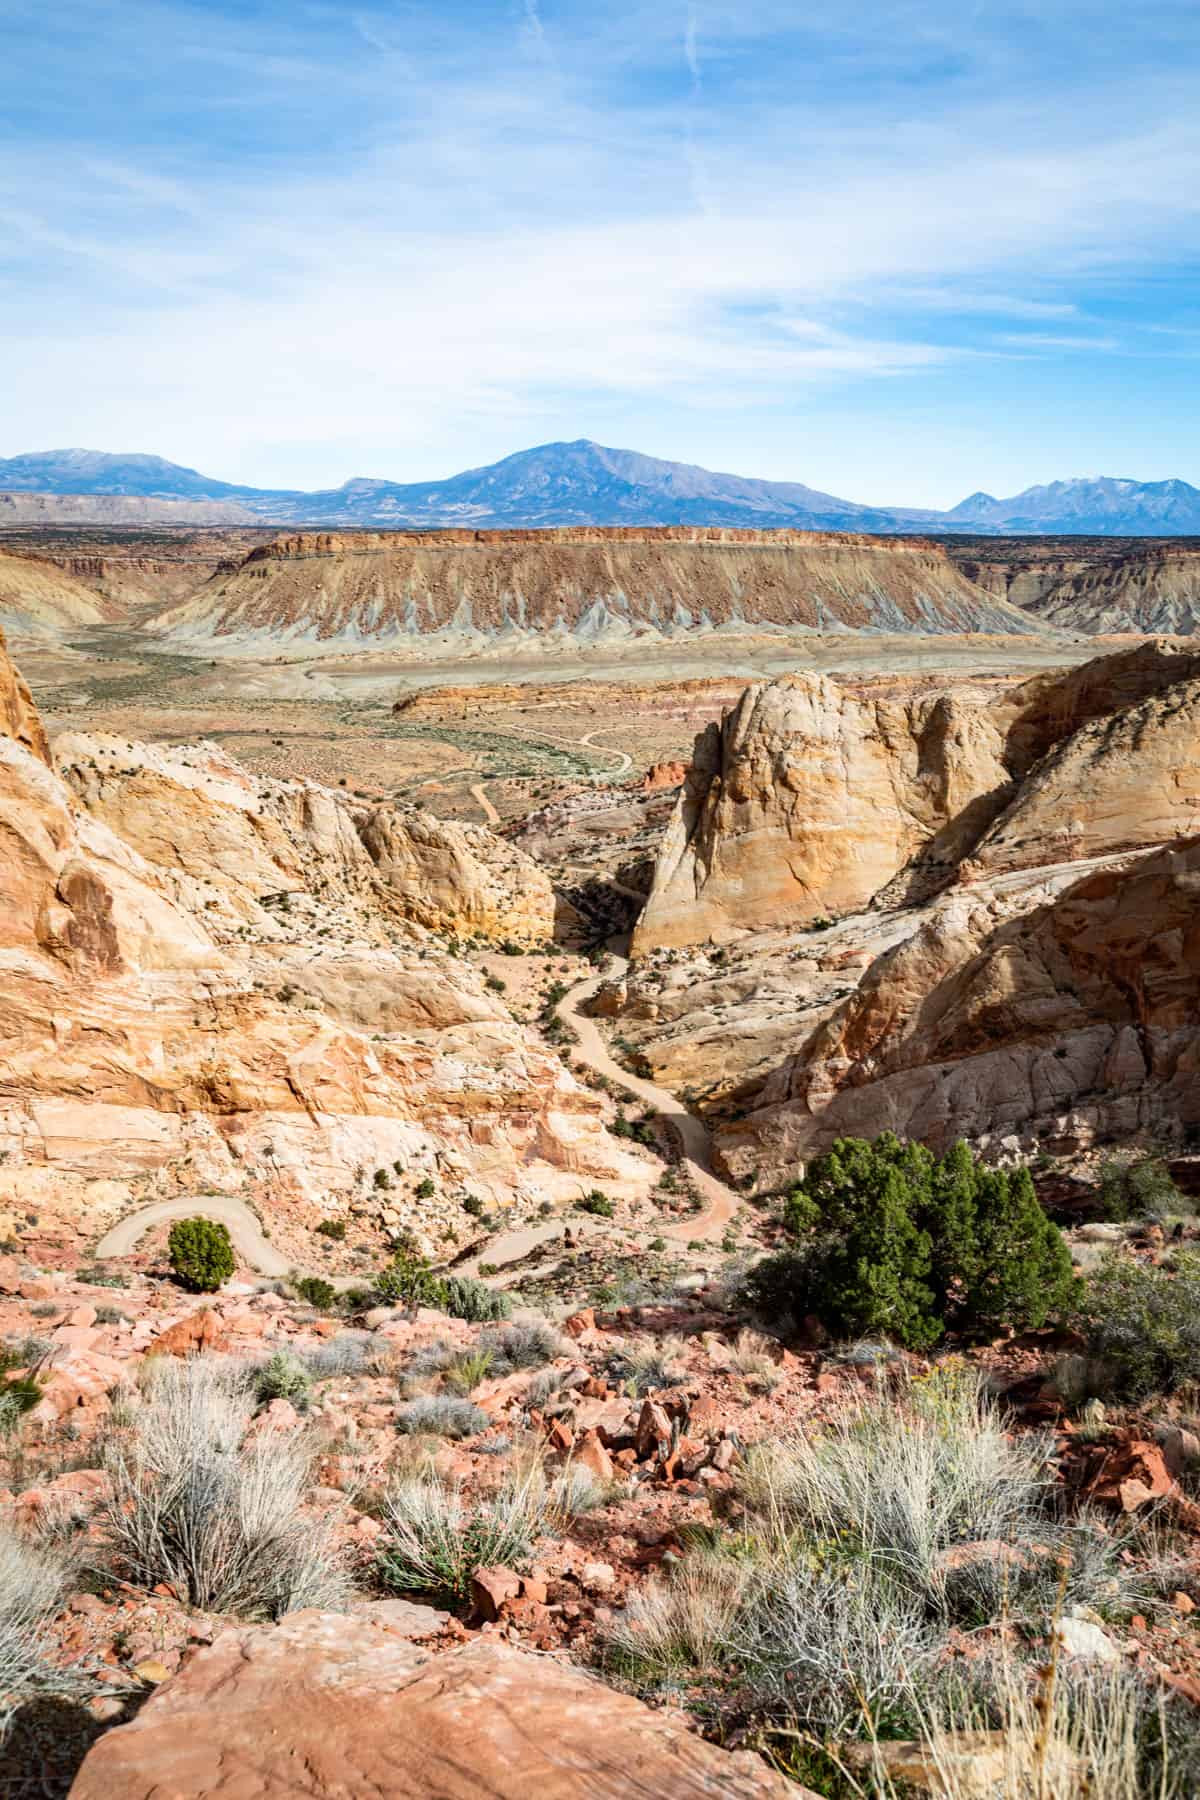 Looking over the valley of rock formations in the backcountry of Capitol Reef National Park just above the famous Burr Trail switchbacks.